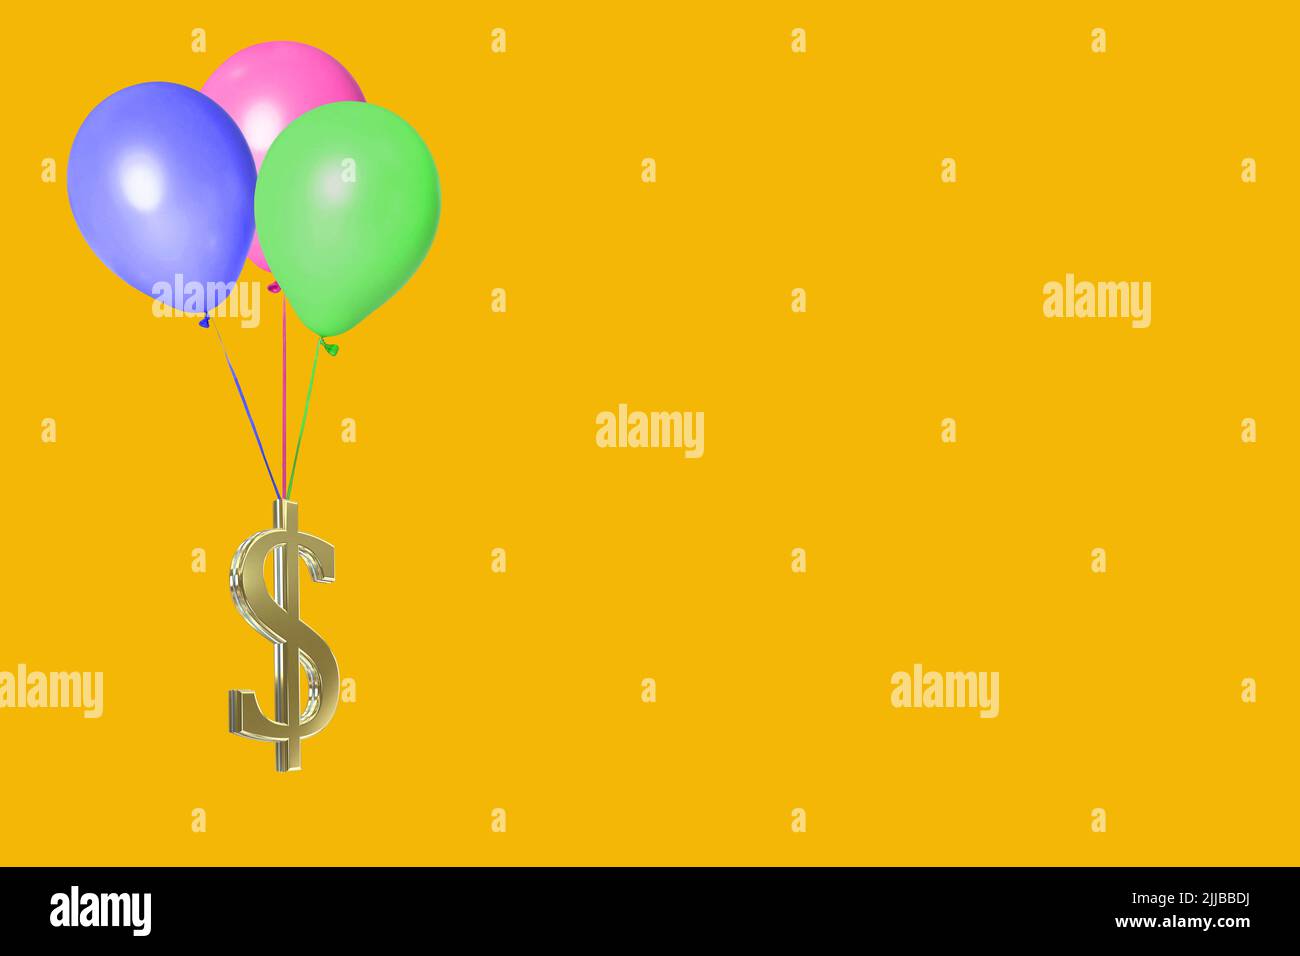 3D gold dollar currency symbol symbols sign signs isolated on colorful colourful yellow background dollar inflation concept Stock Photo